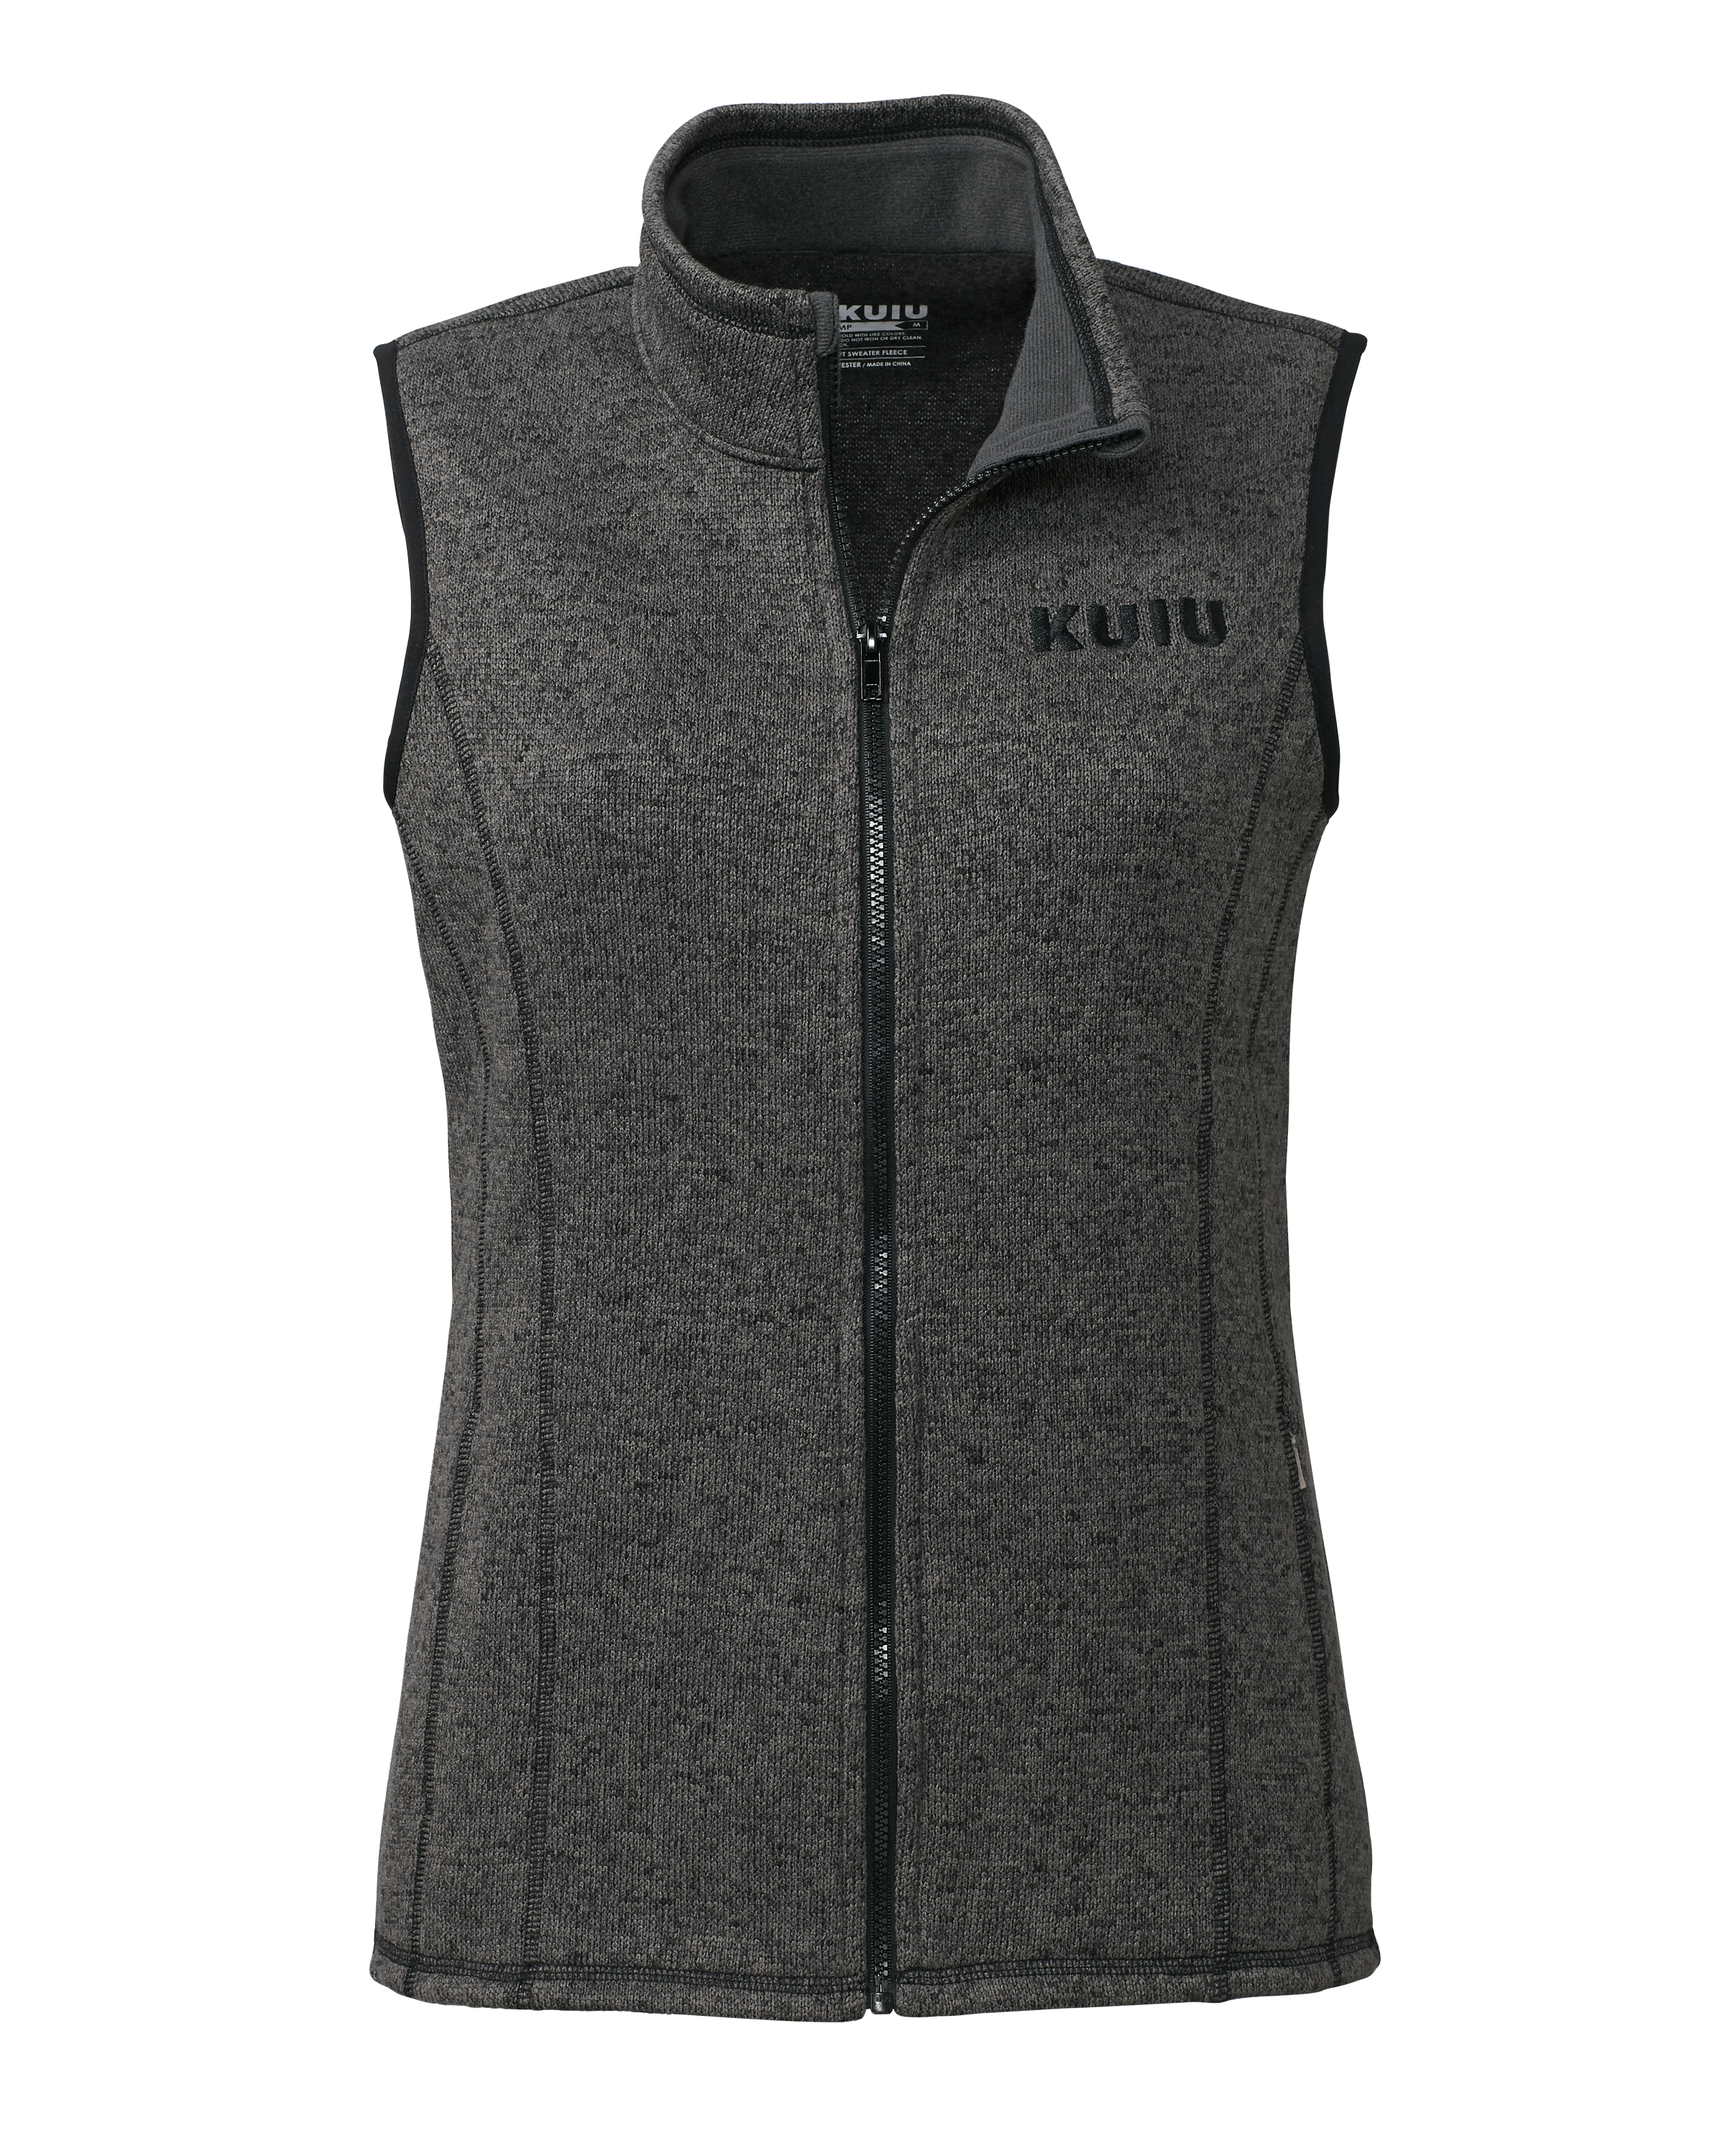 KUIU Outlet Women's Base Camp Sweater Vest in Charcoal | Size XL